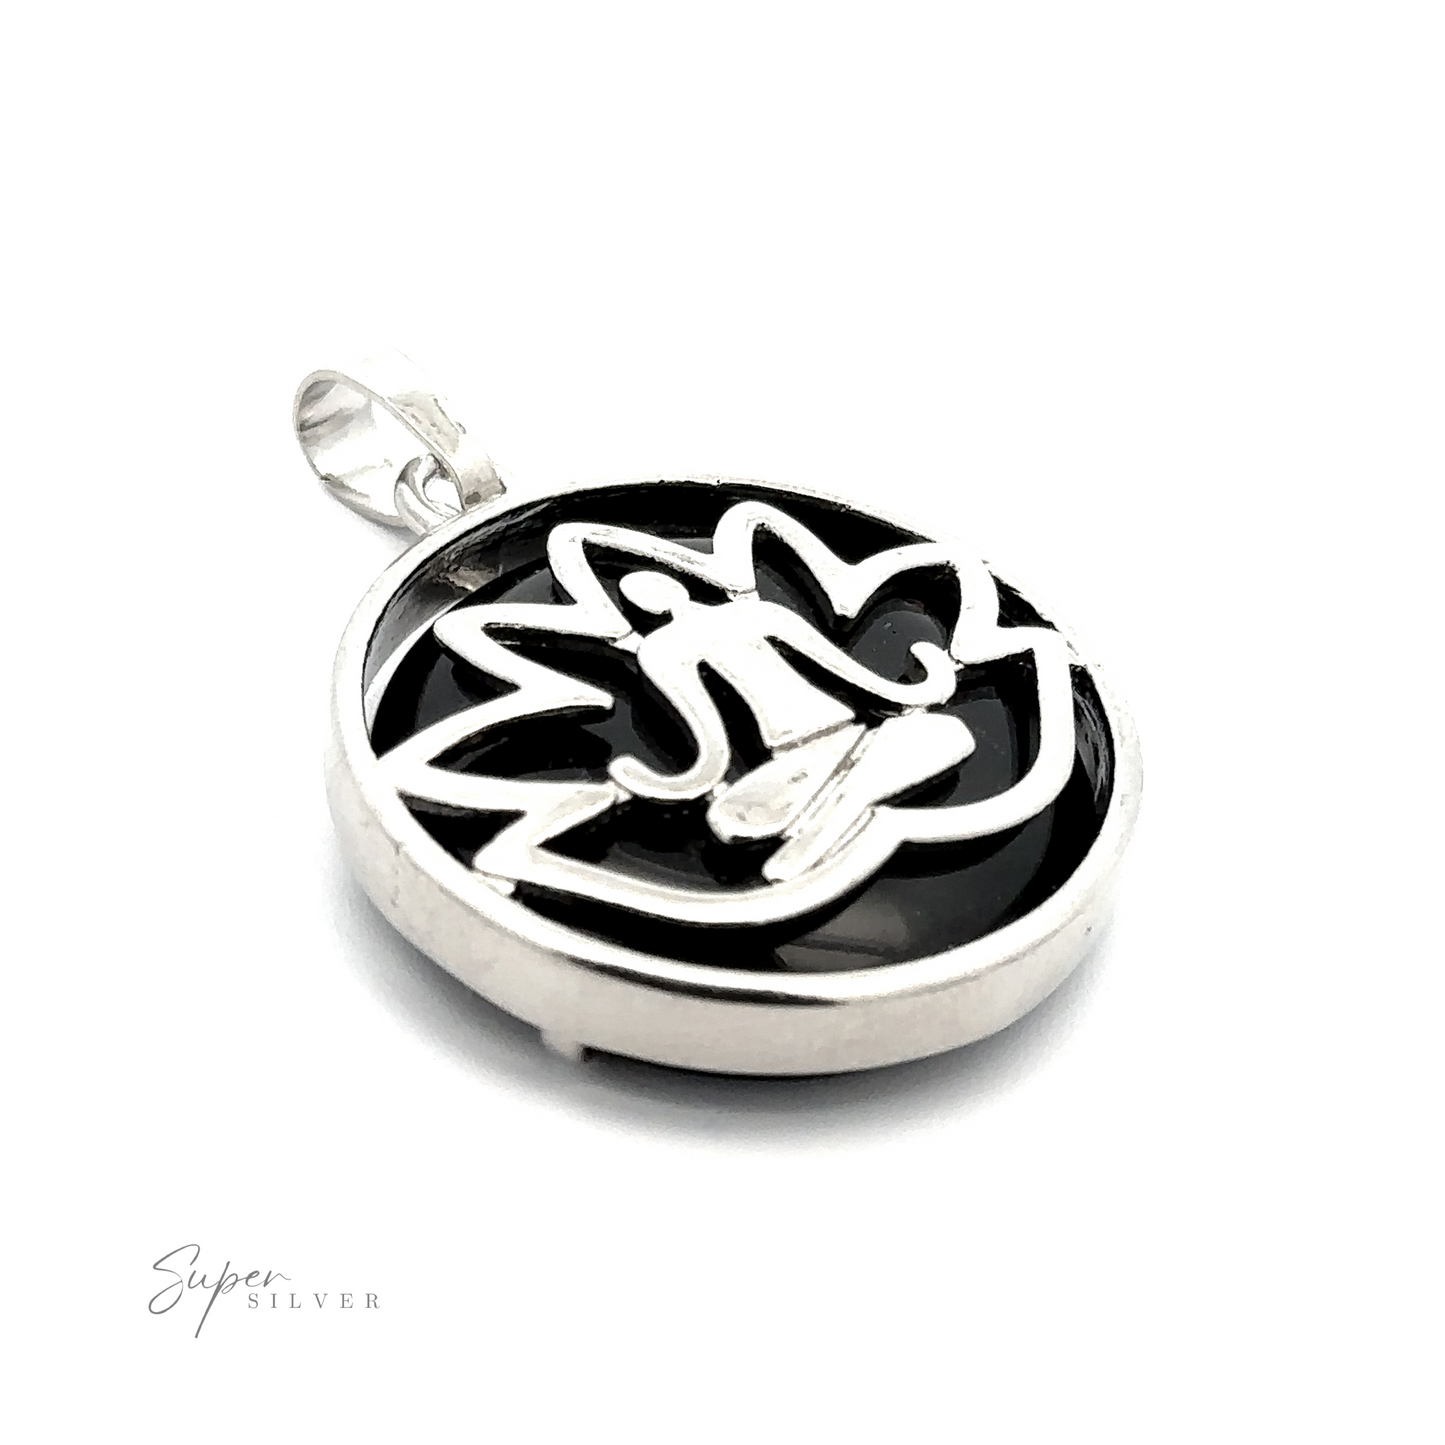 
                  
                    Silver Plated Lotus Meditation Pendant with Gemstone featuring a lotus design encircling a seated figure, accented with a round gemstone on a black background and "Super Silver" logo.
                  
                